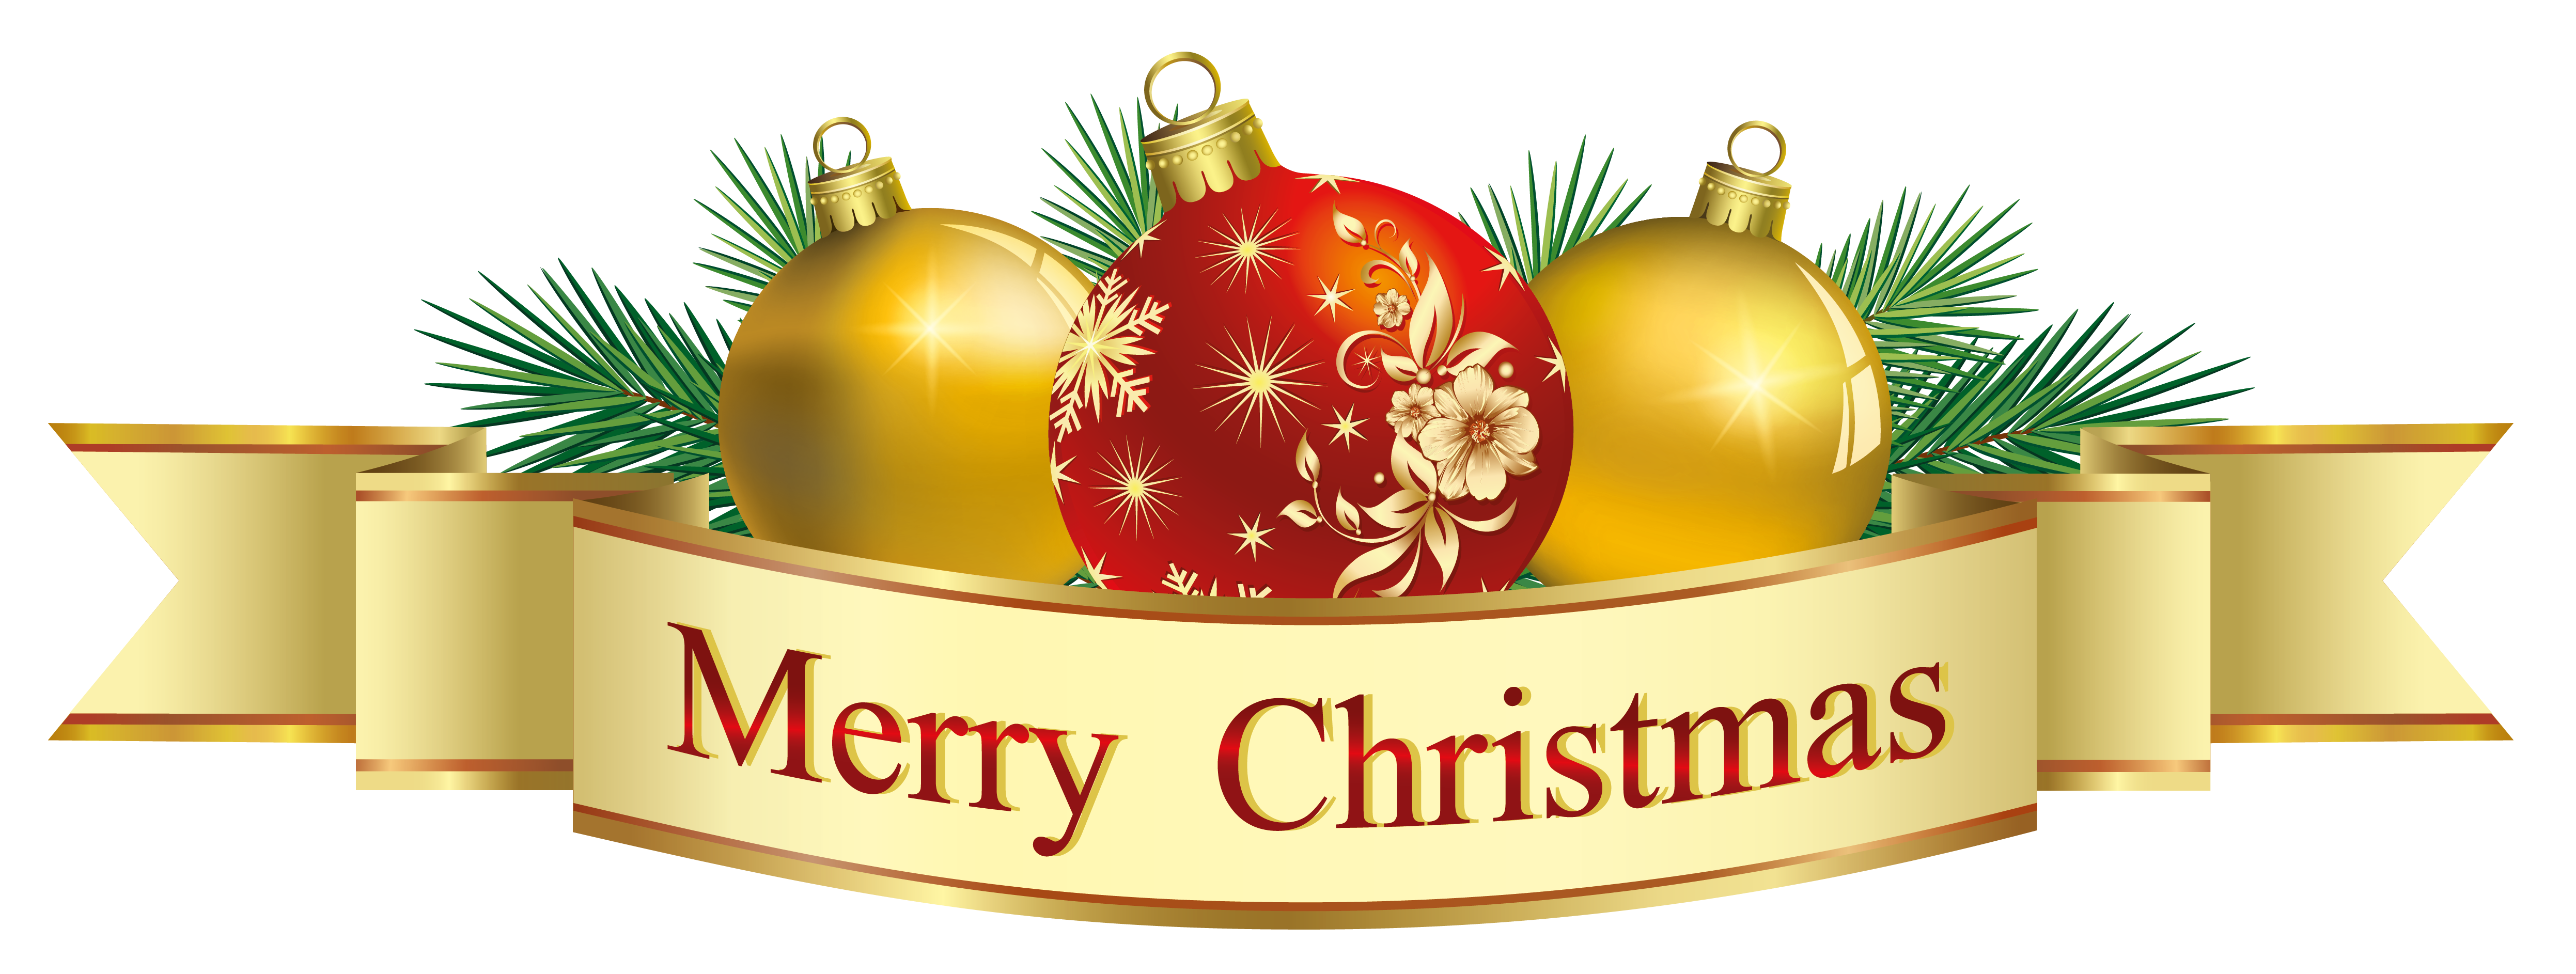 merry-christmas-clip-art-images1-klein-school-0cTsDF-clipart.png